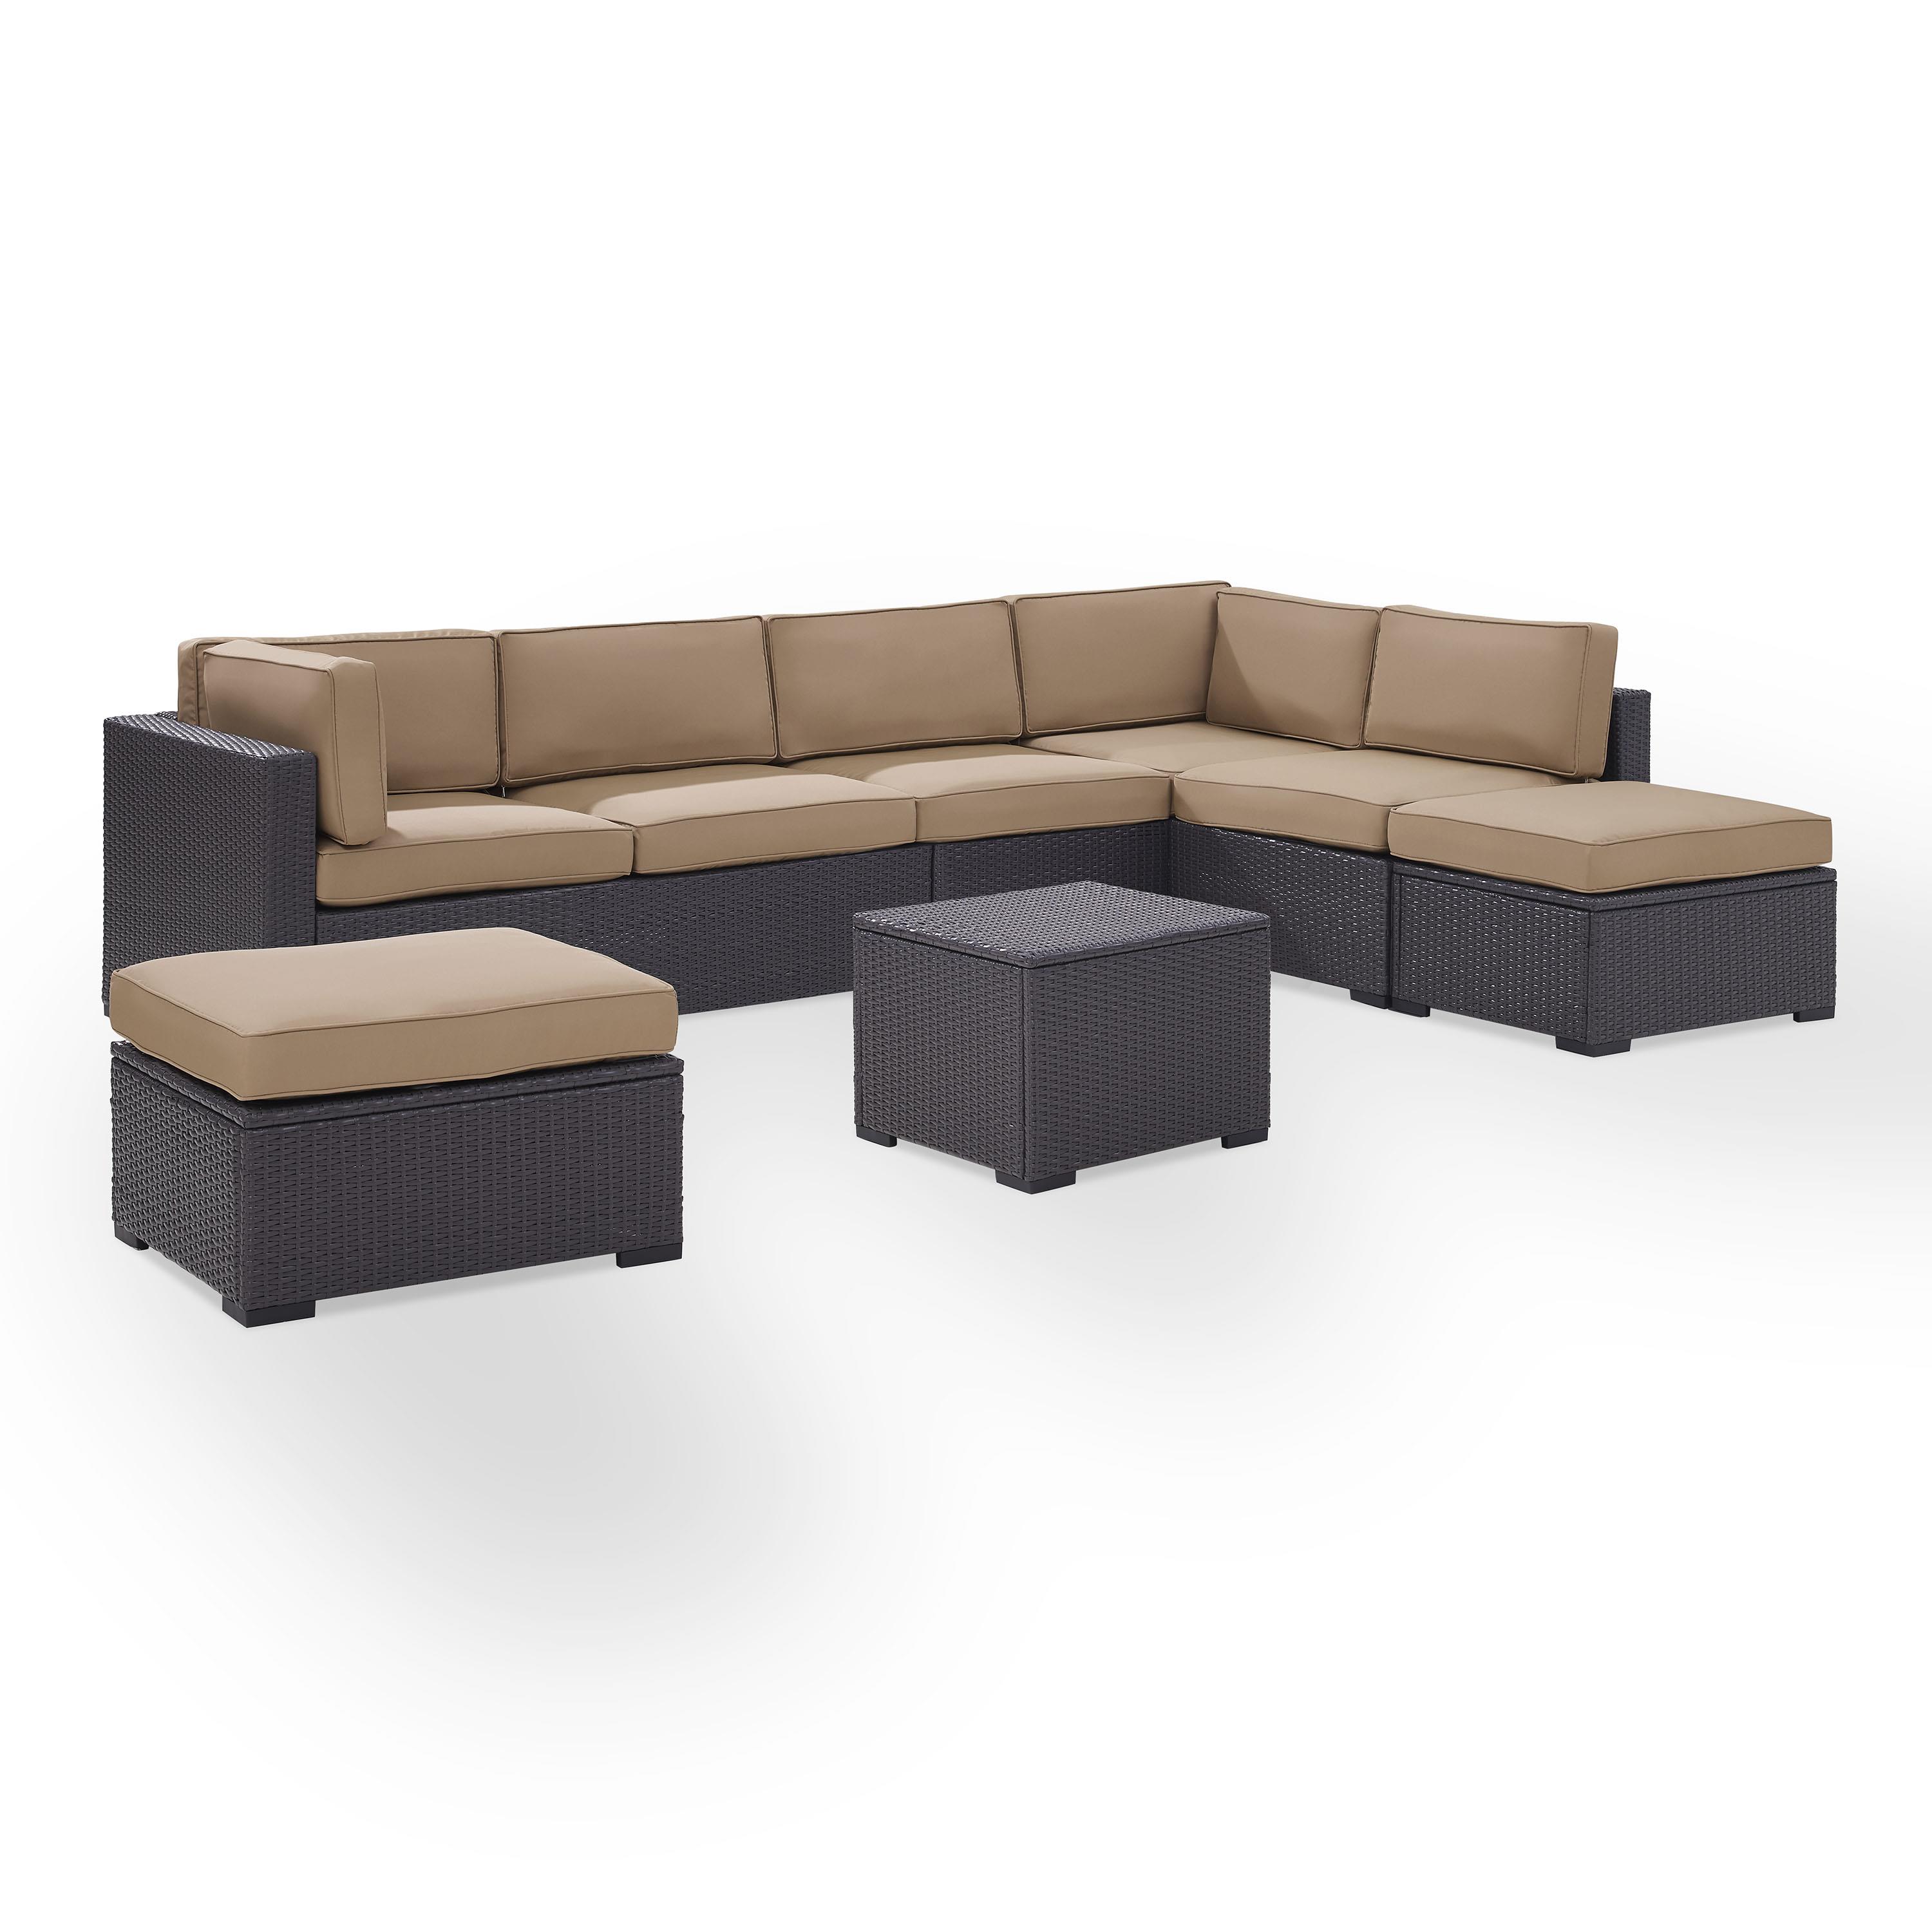 BISCAYNE 7 PERSON OUTDOOR WICKER SEATING SET IN MOCHA - TWO LOVESEATS, ONE ARMLESS CHAIR, COFFEE TABLE, TWO OTTOMANS - image 2 of 4